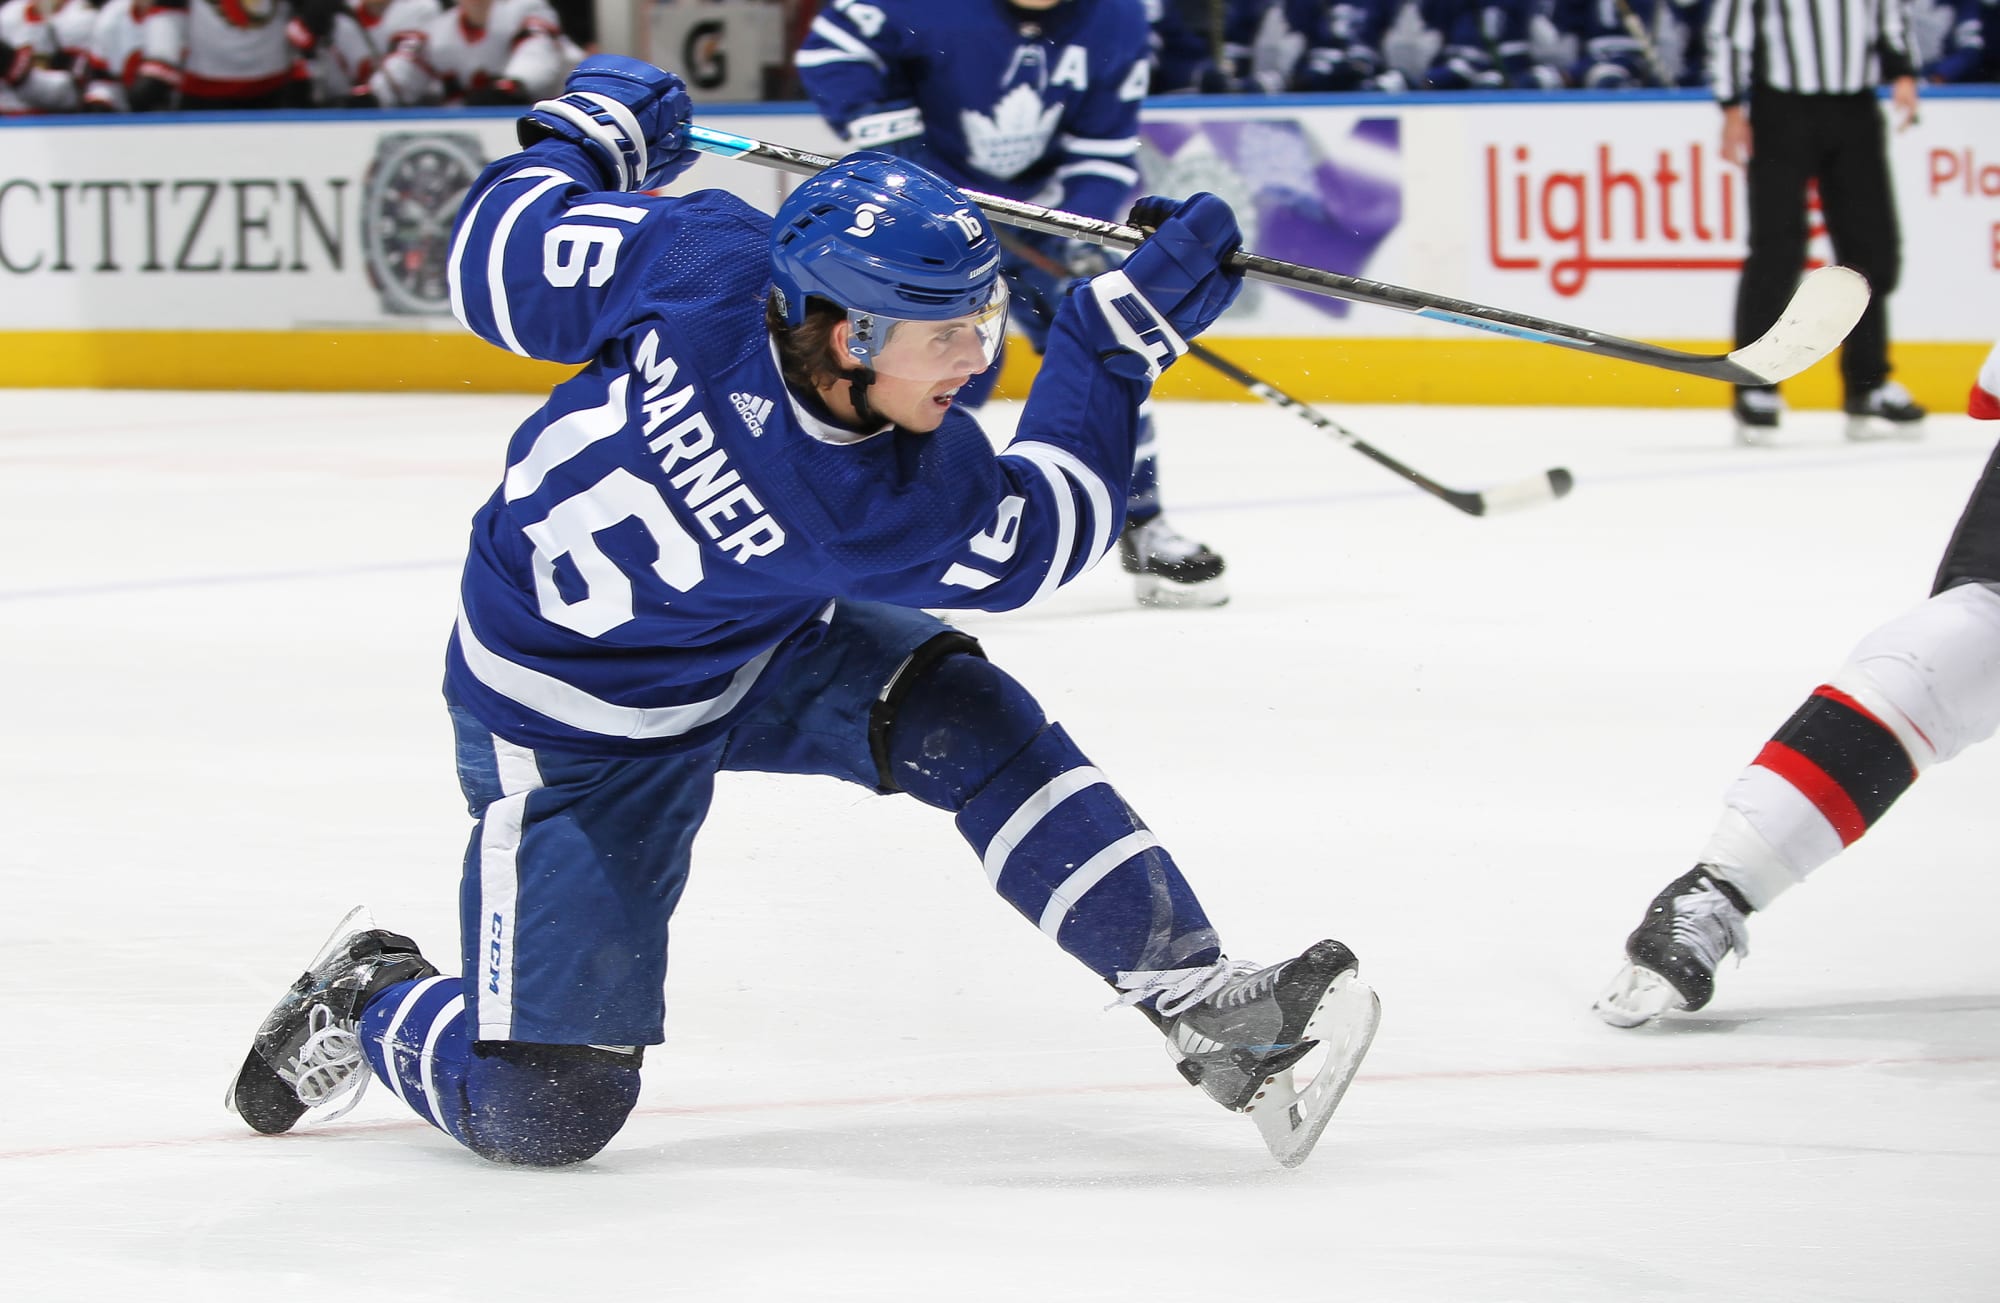 Toronto Maple Leafs: Matthews and Marner duo continue to dominate